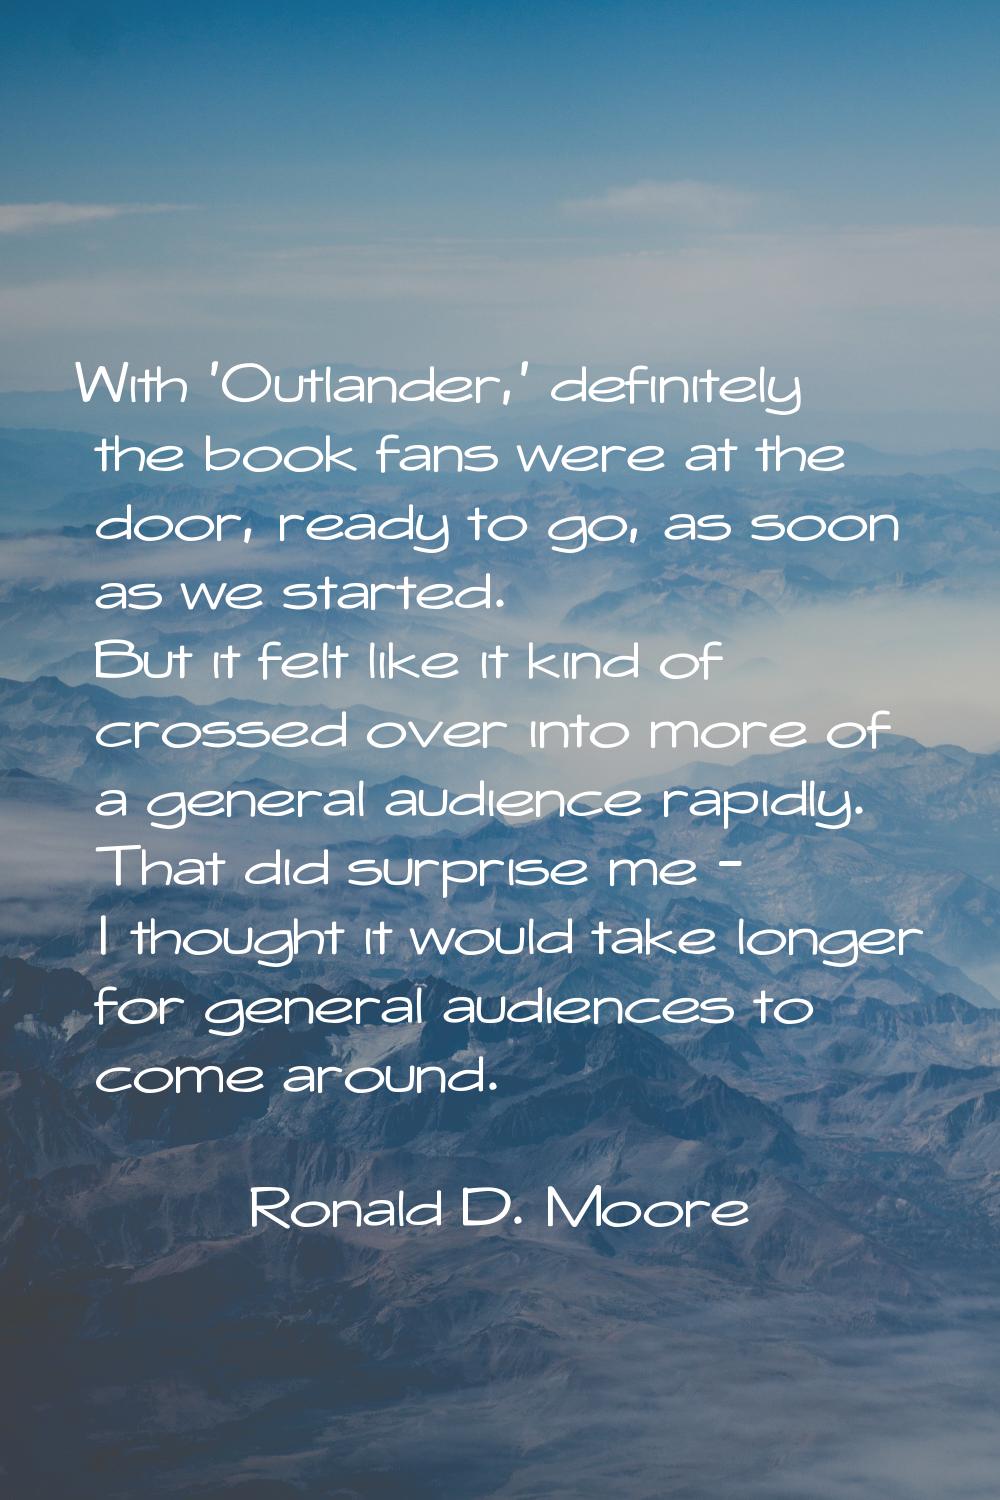 With 'Outlander,' definitely the book fans were at the door, ready to go, as soon as we started. Bu